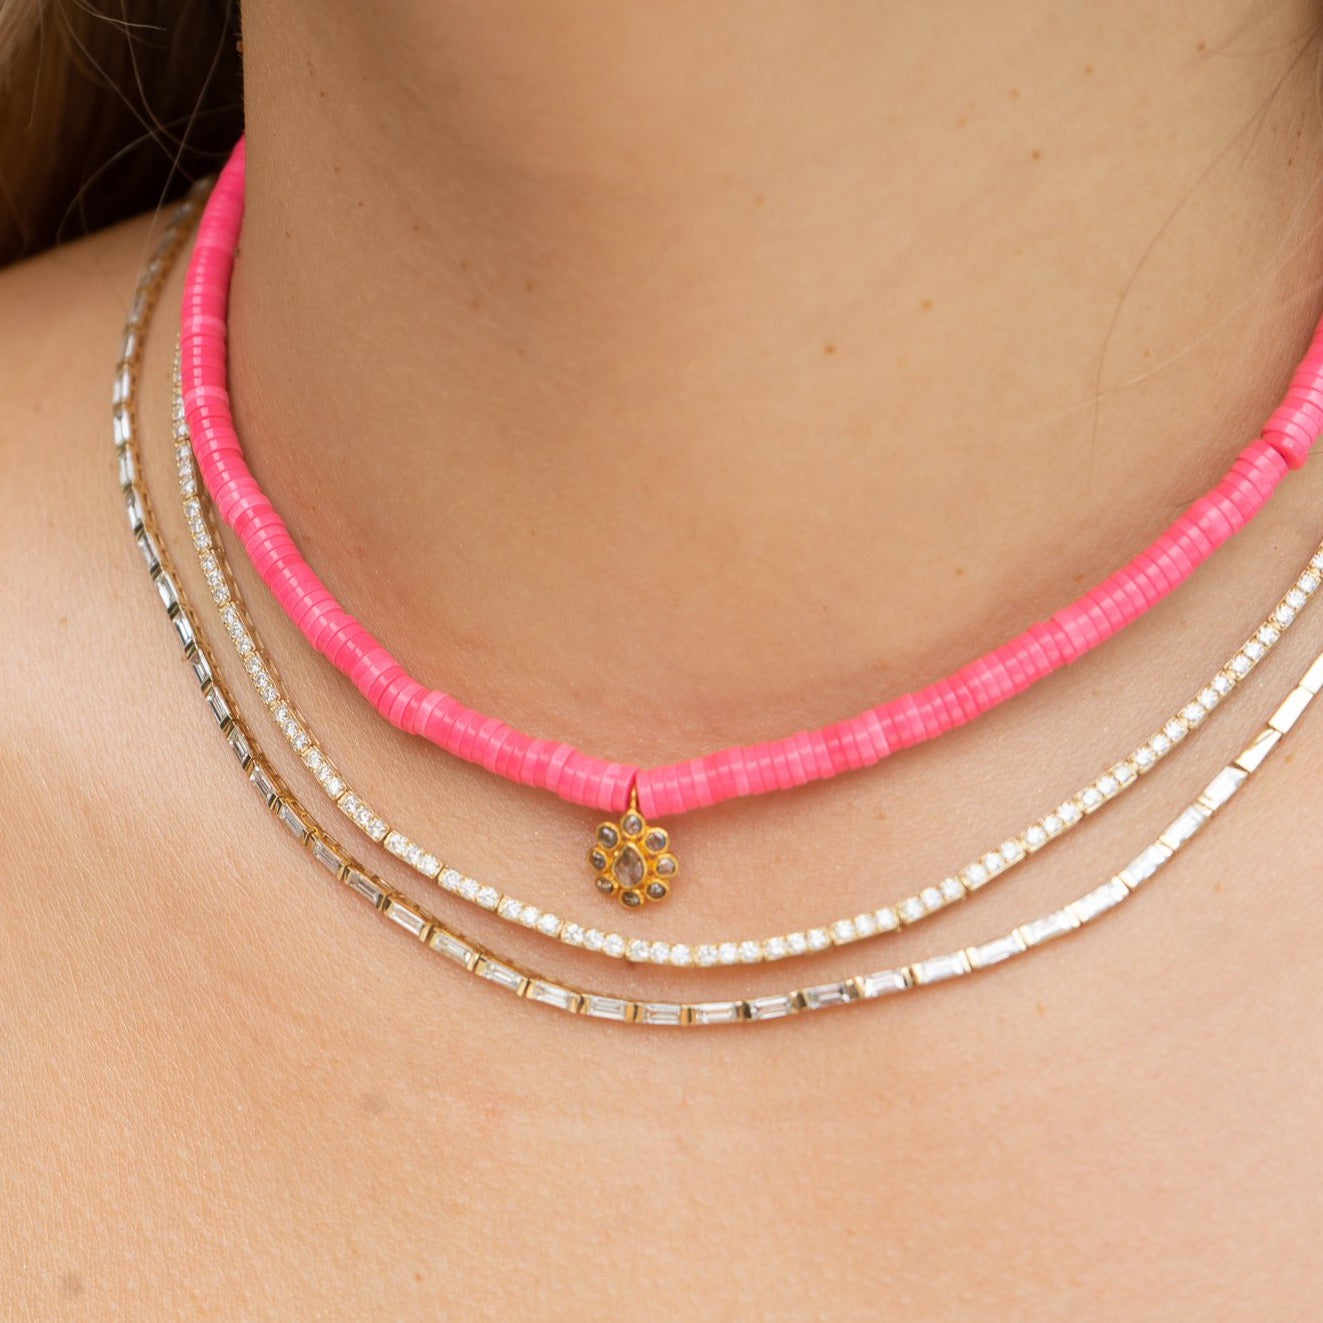 Necklaces - Pink - Beads On Belrose